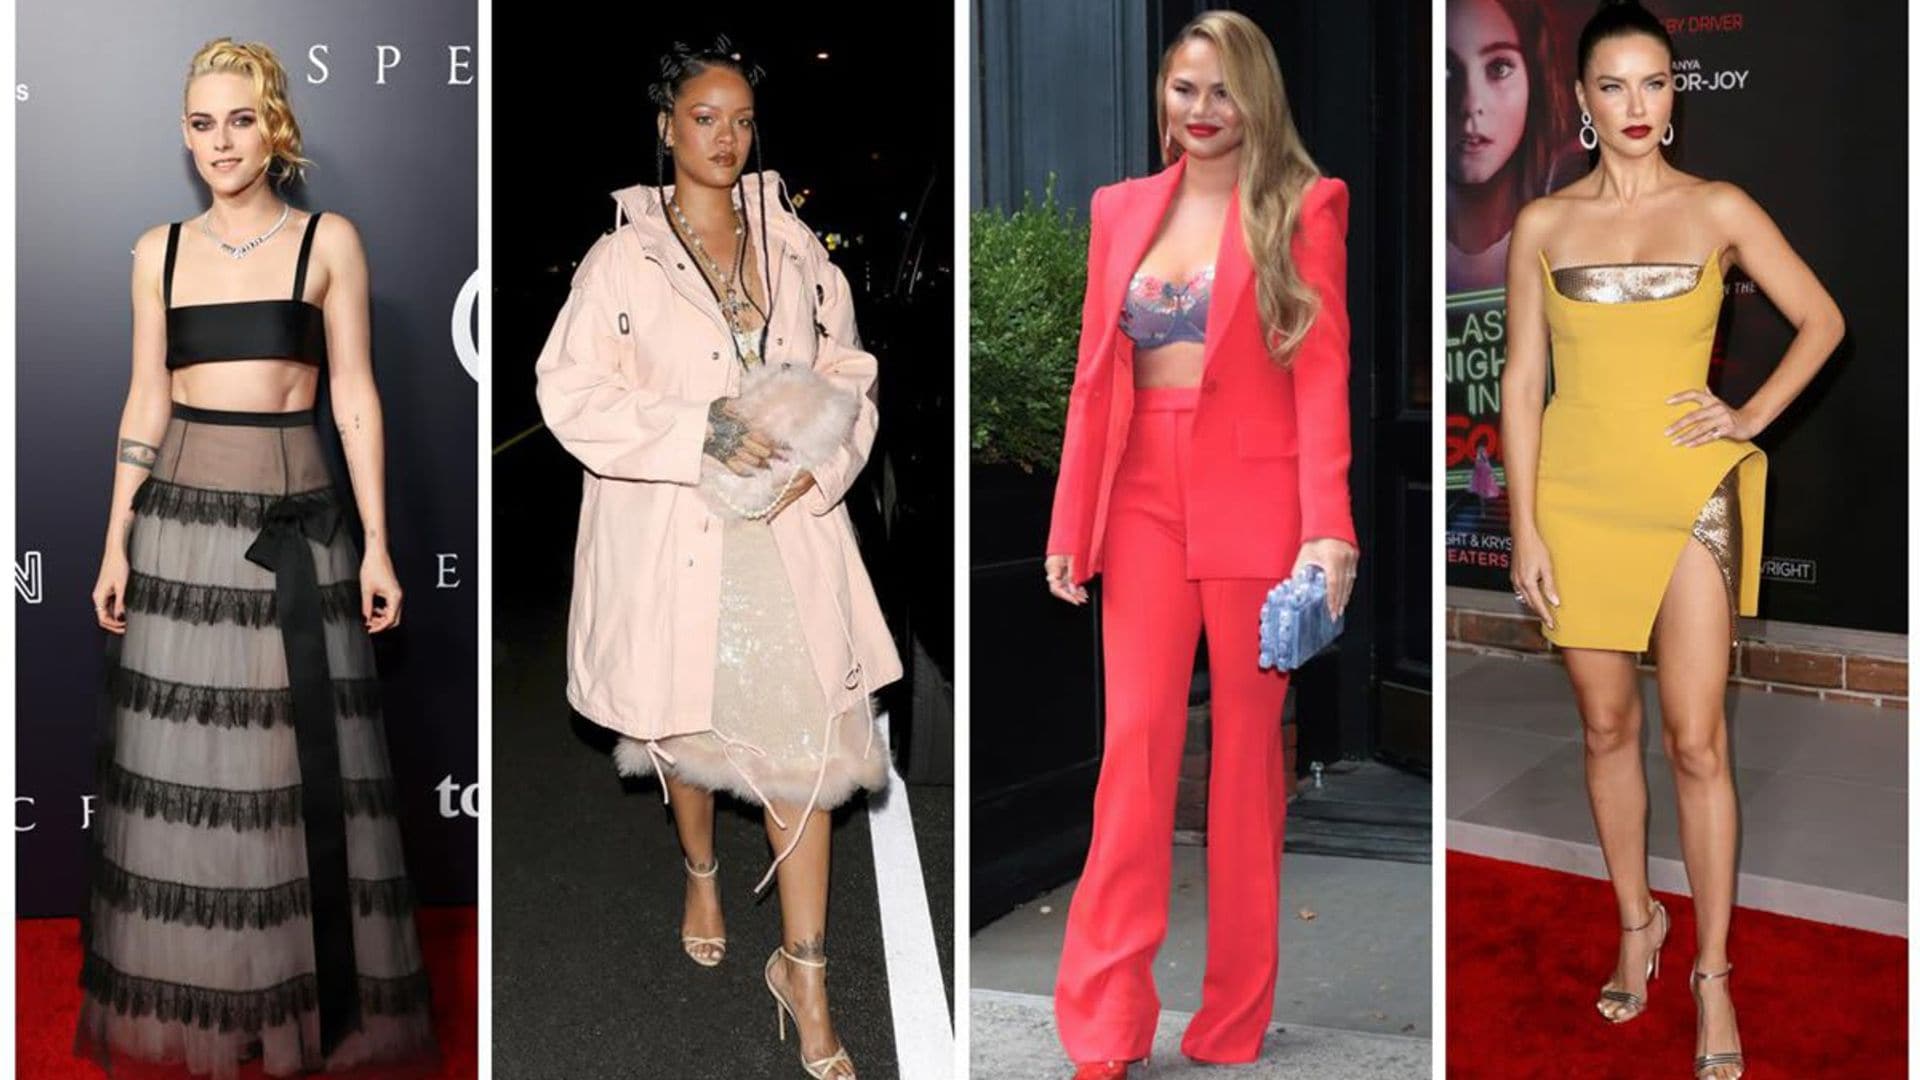 The Top 10 Celebrity Style Looks of the Week - October 29